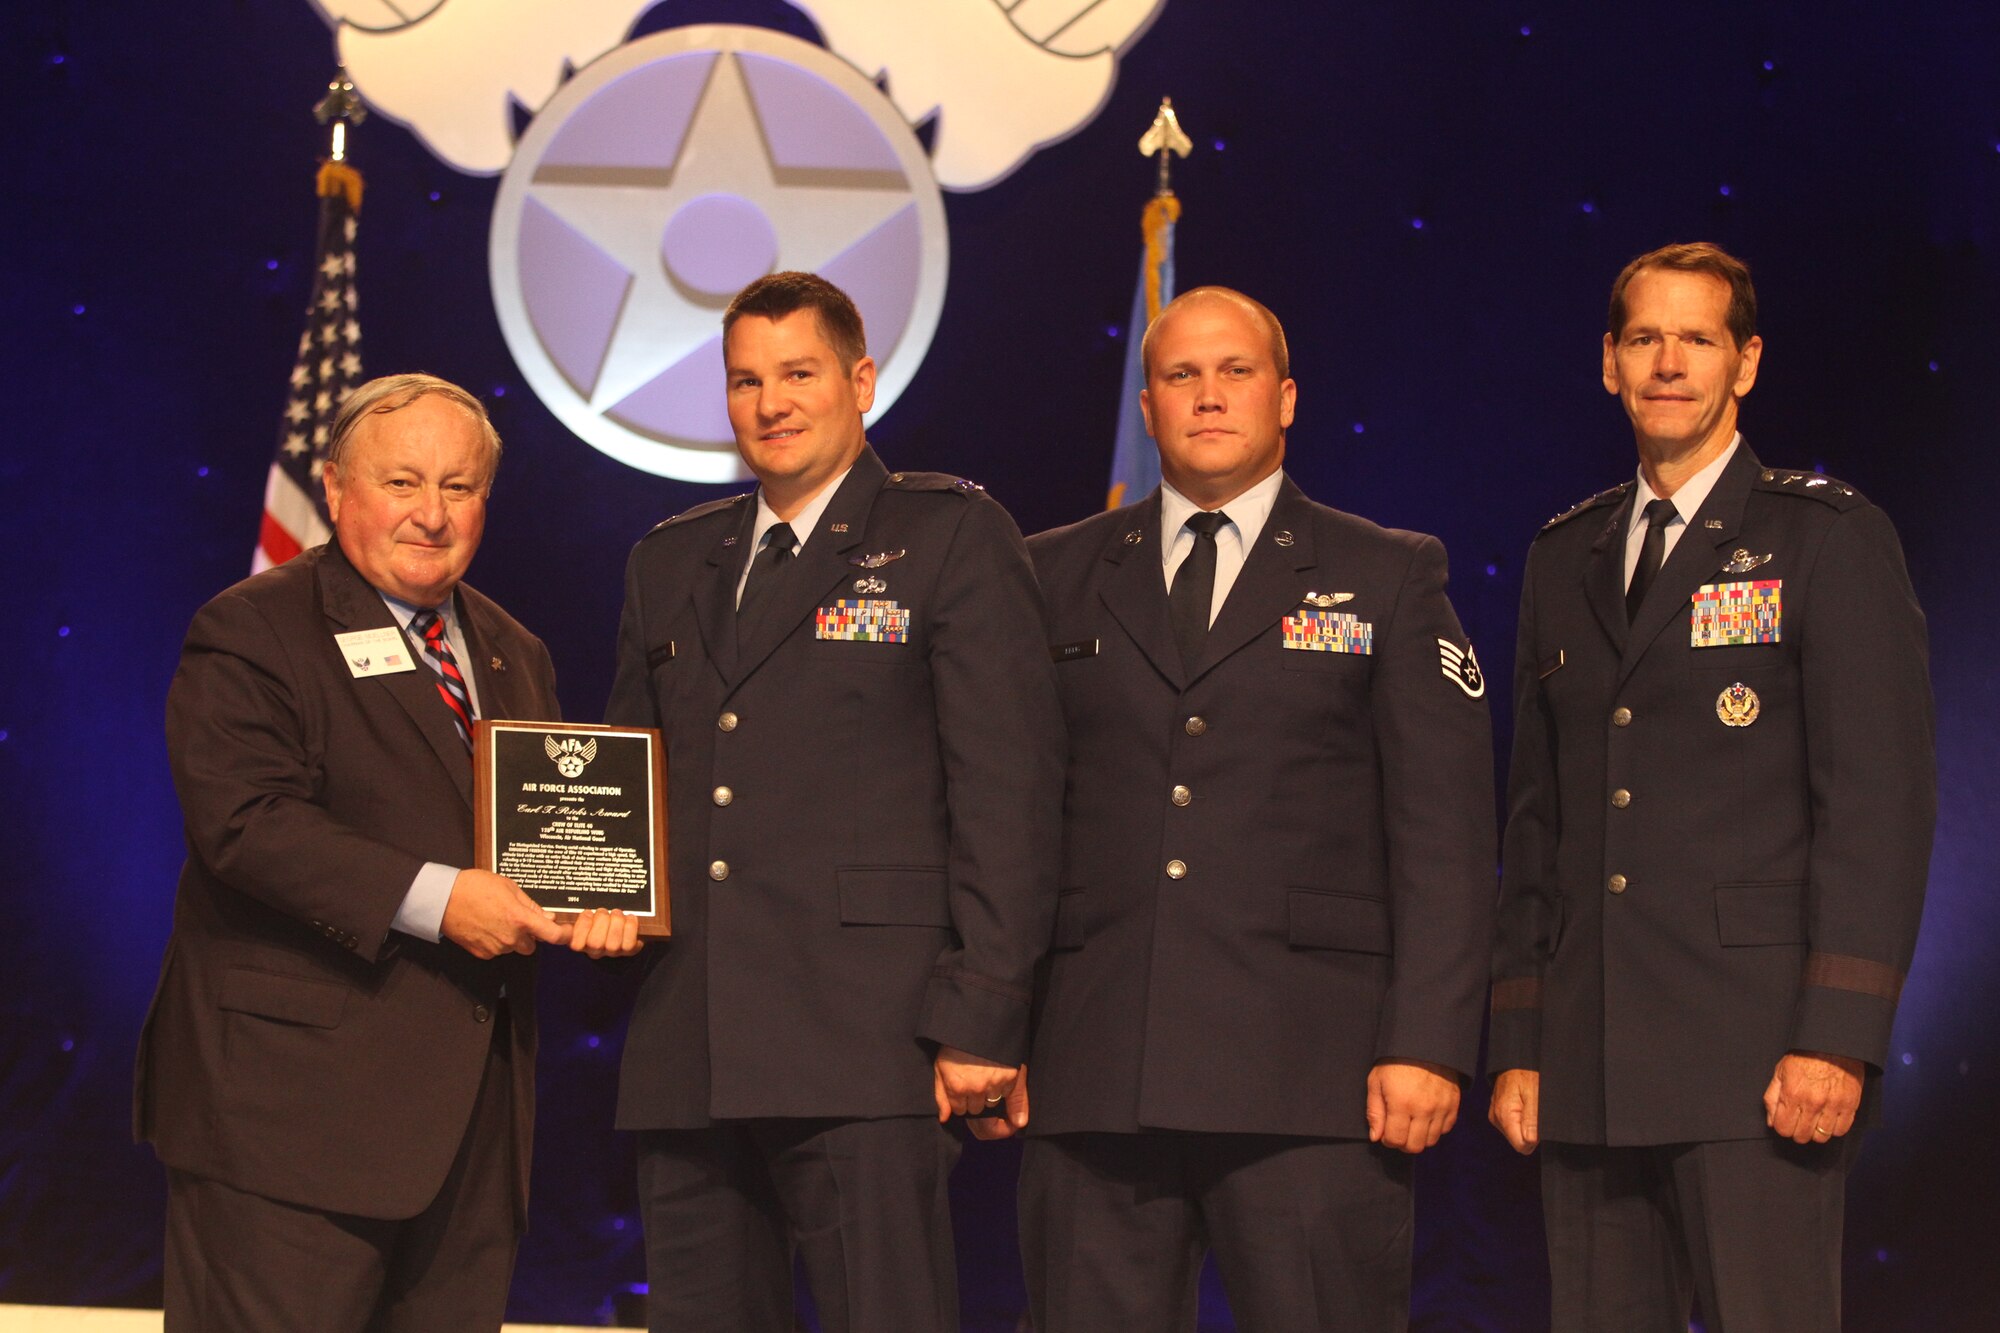 Capt. Rory Cattelan, a pilot with the 128th Air Refueling Wing and Staff Sgt. Tyson Krug, a boom operator with the 128 ARW, receive the AFA Earl T. Ricks Award, which is given to Air National Guard members who have demonstrated outstanding airmanship, from Air Force Association at the 2014 Air & Space Conference and Technology Exposition in Washington D.C. Sept. 18, 2014.